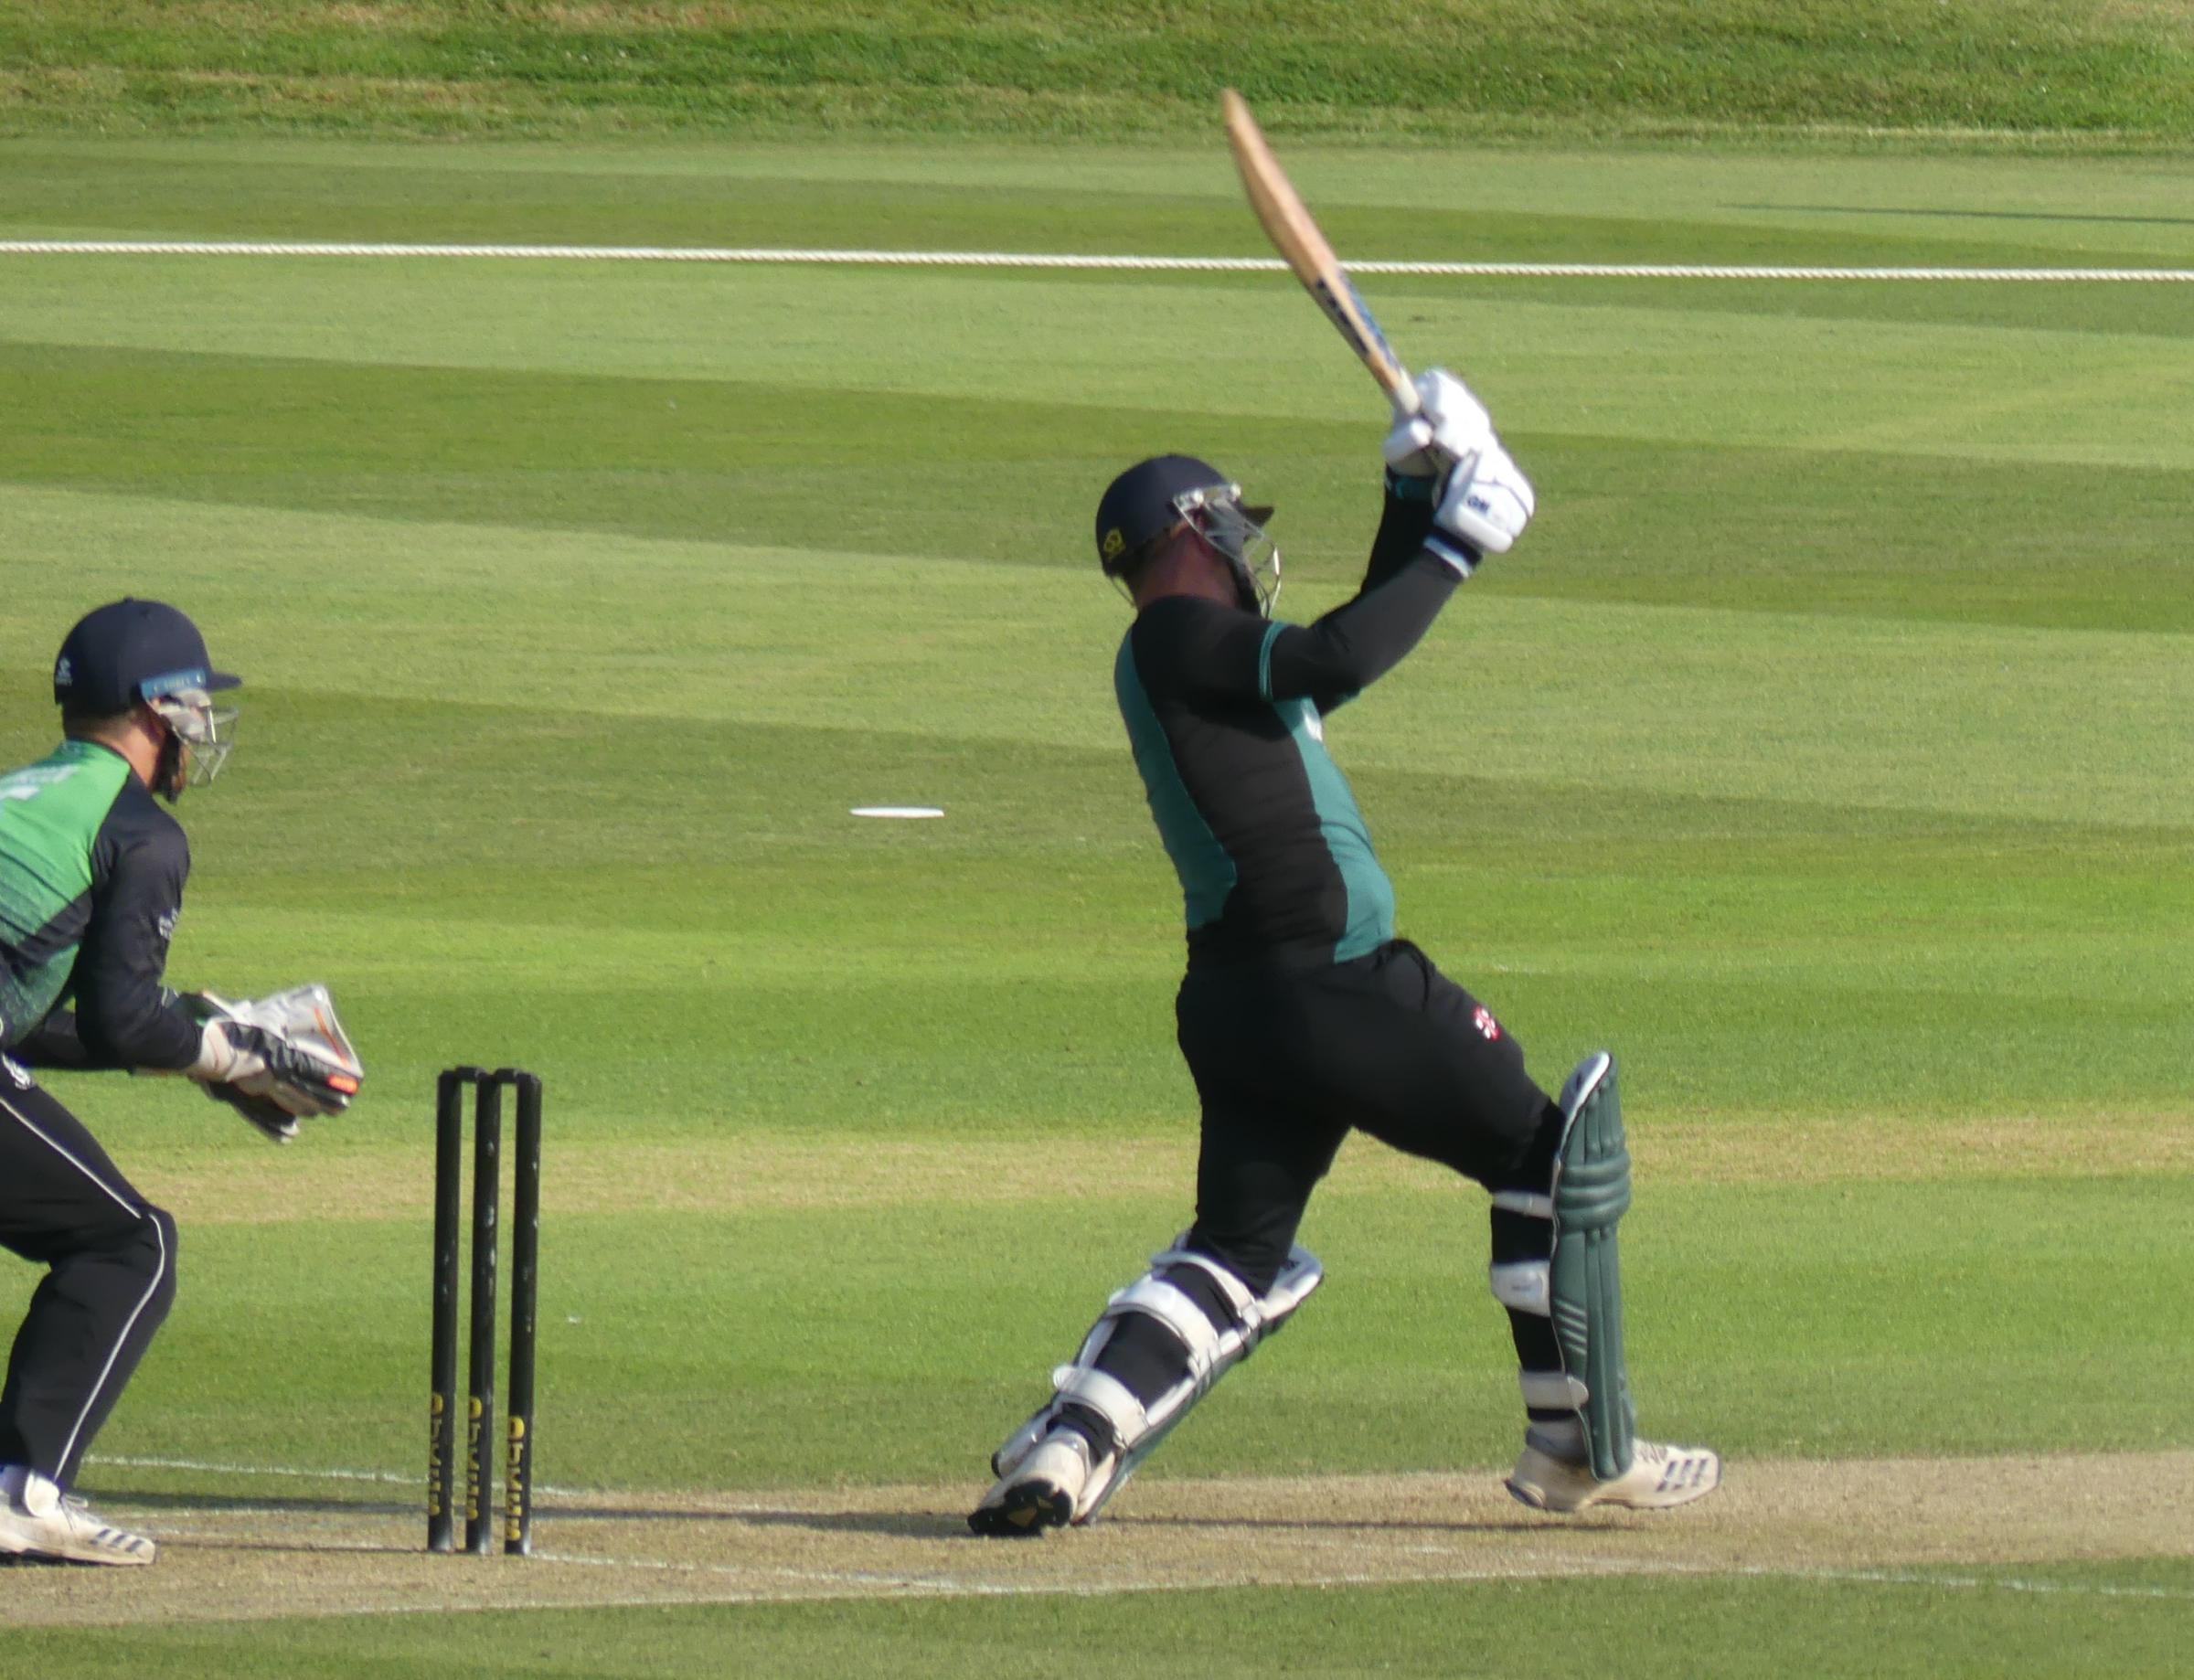 HIT: McGown boundary shot